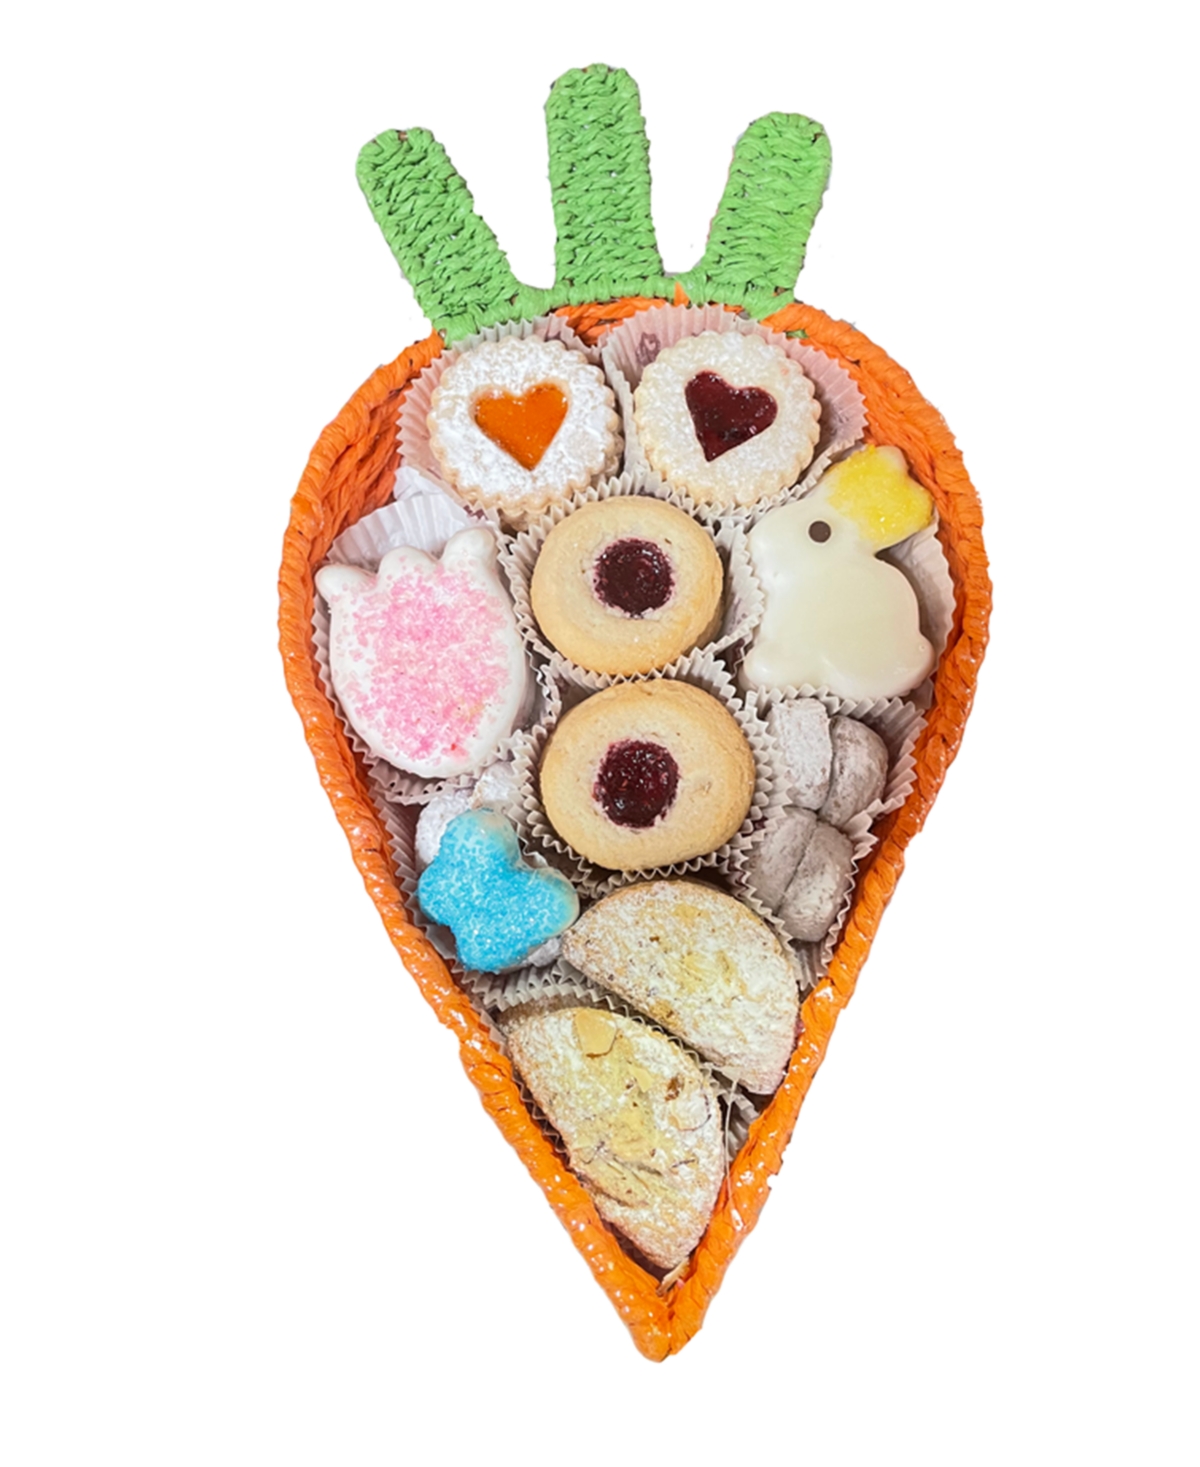 Cookies Con Amore 24 oz Carrot Shaped Handmade Assorted Cookie Gift Basket